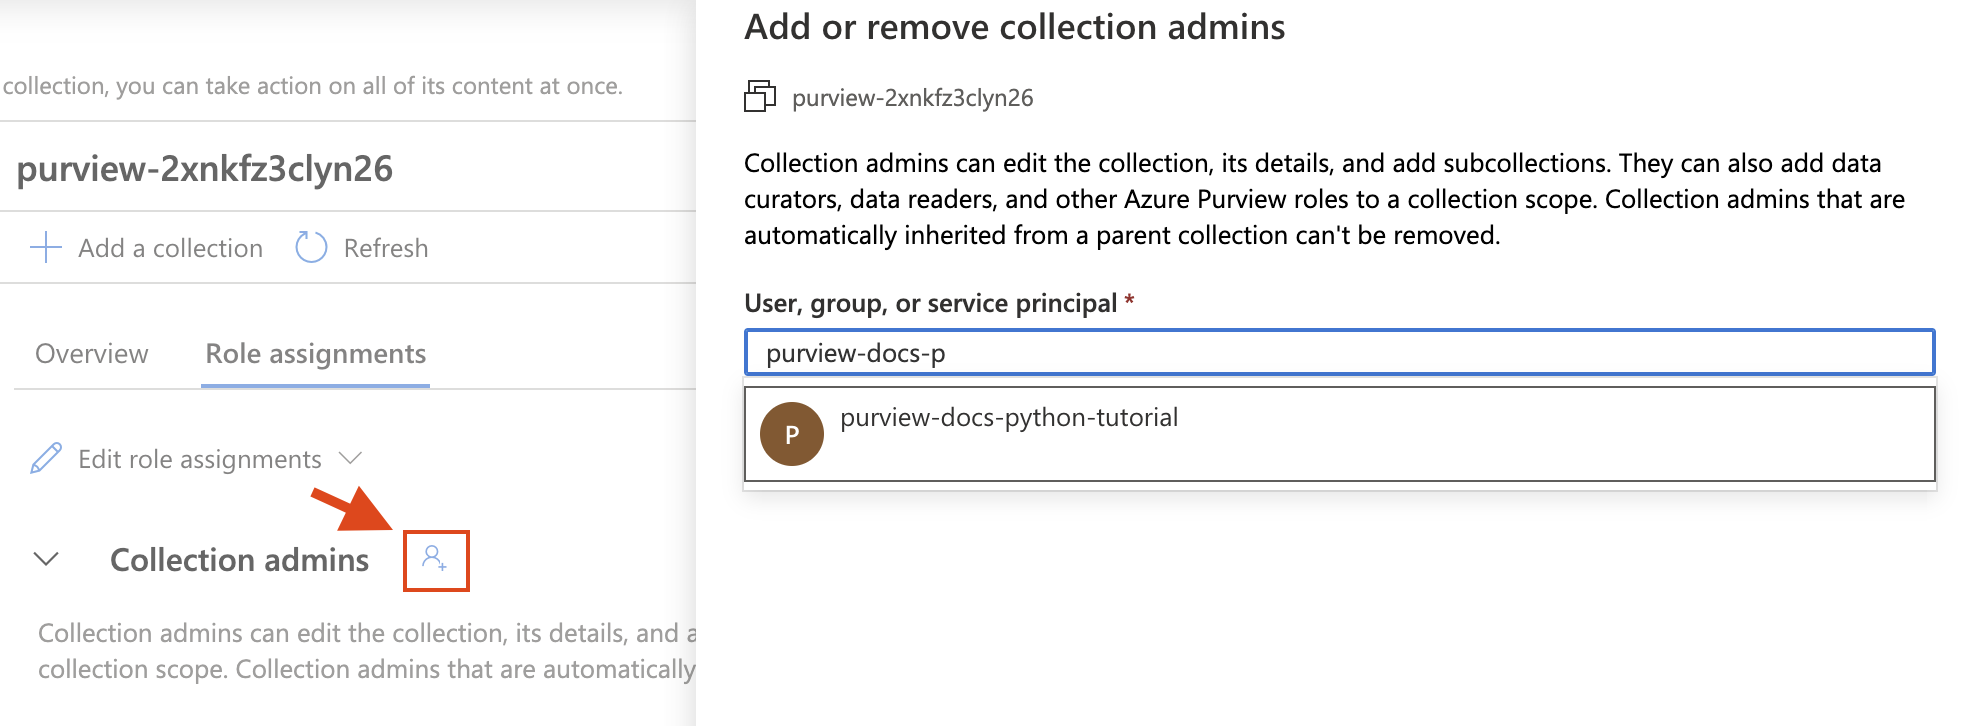 Screenshot of the Role assignments menu under a collection in the Microsoft Purview governance portal. The add user button is select next to the Collection admins tab. The add or remove collection admins pane is shown, with a search for the service principal in the text box.